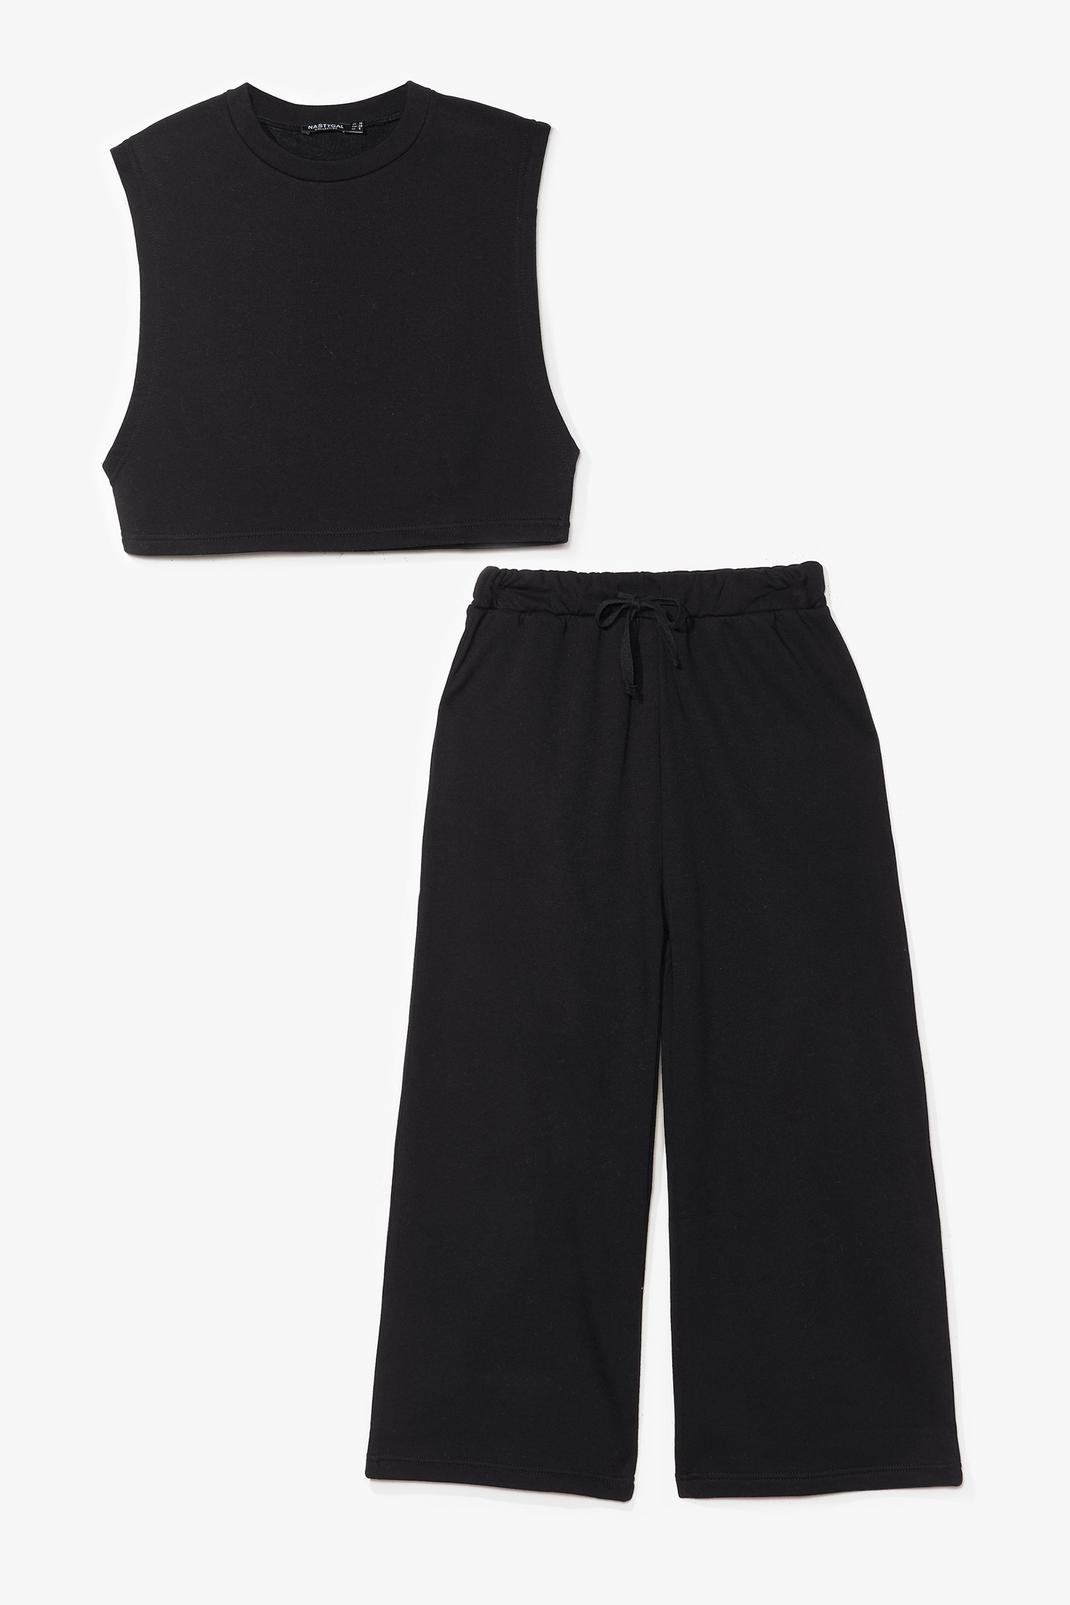 Black Cropped Vest Top and Trousers Loungewear Set image number 1